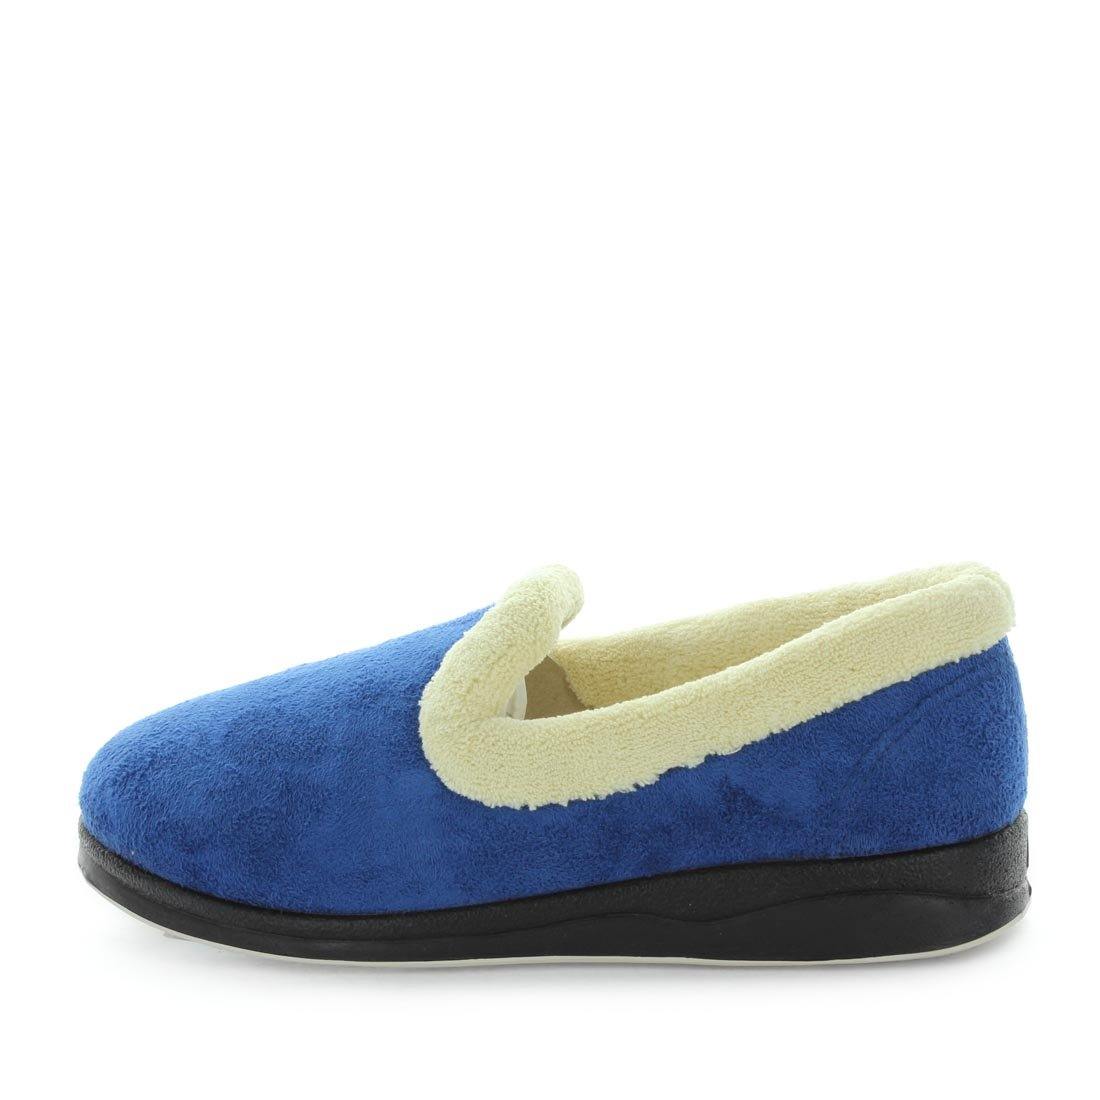 Load image into Gallery viewer, Classic womens slip on slipper, Emille by panda slippers. A slip on style slipper made with soft materials and comfy fit design for the perfect indoor slipper. showing a non slip sole and micro terry trimming - comfort slippers - womens comfort slippers
